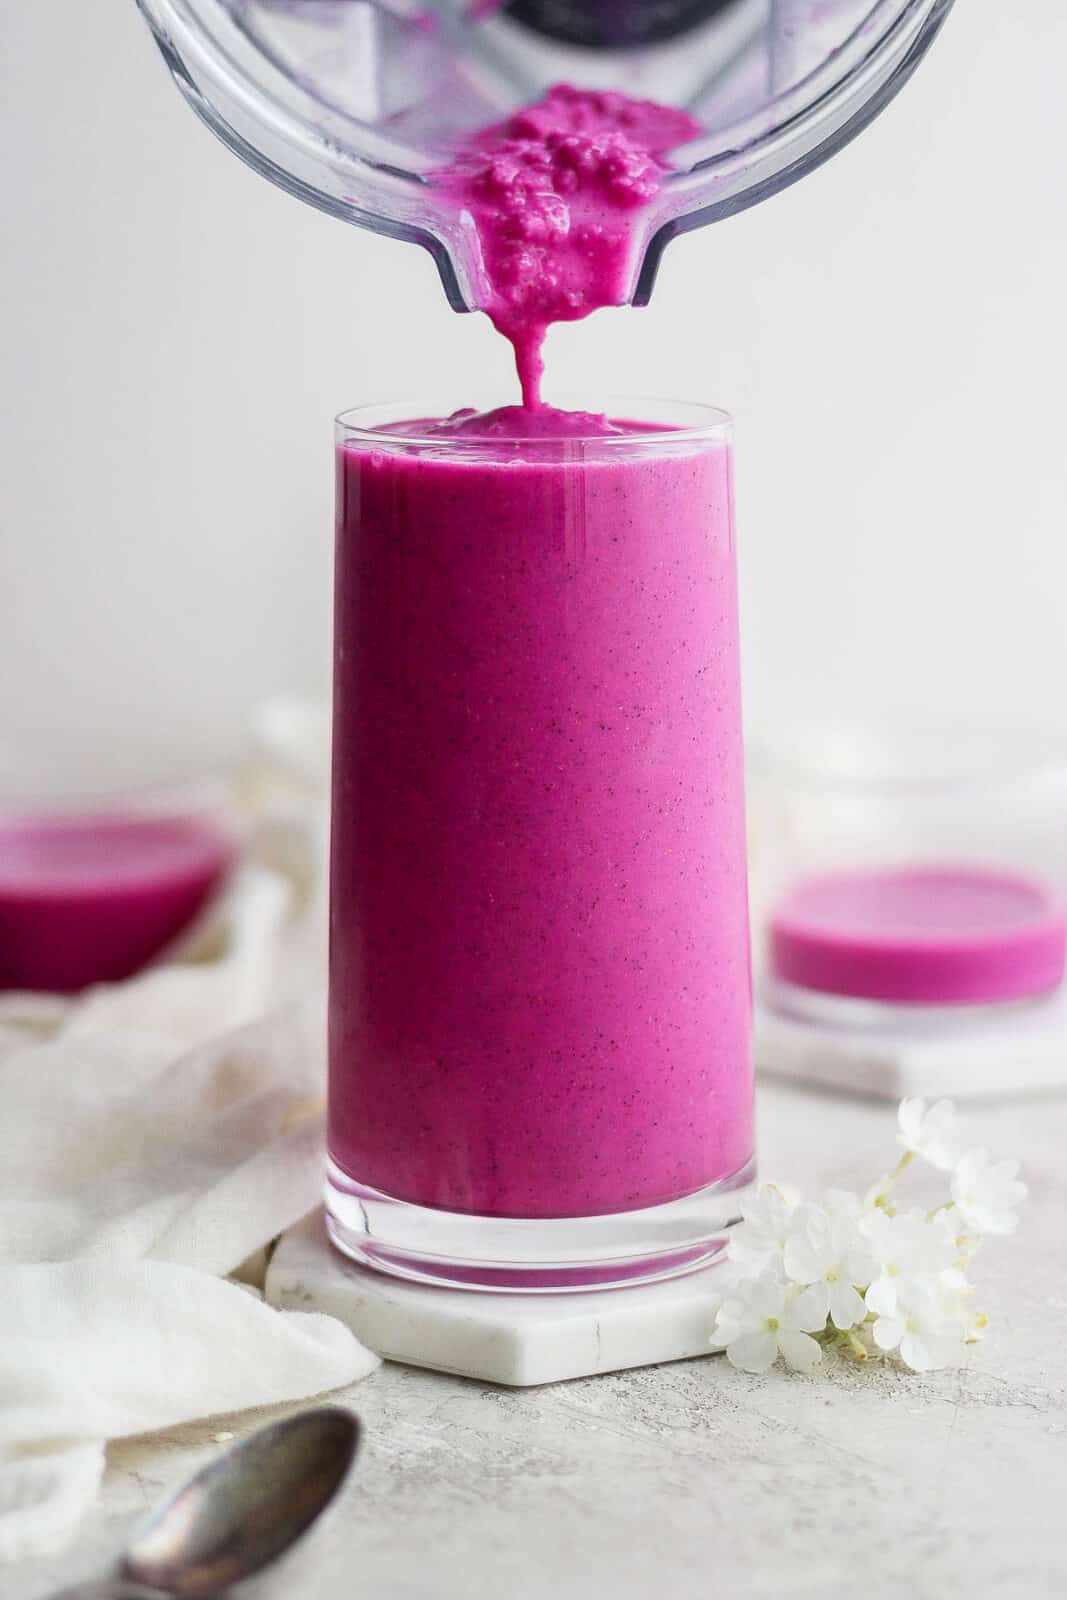 Dragonfruit smoothie being poured into a glass.